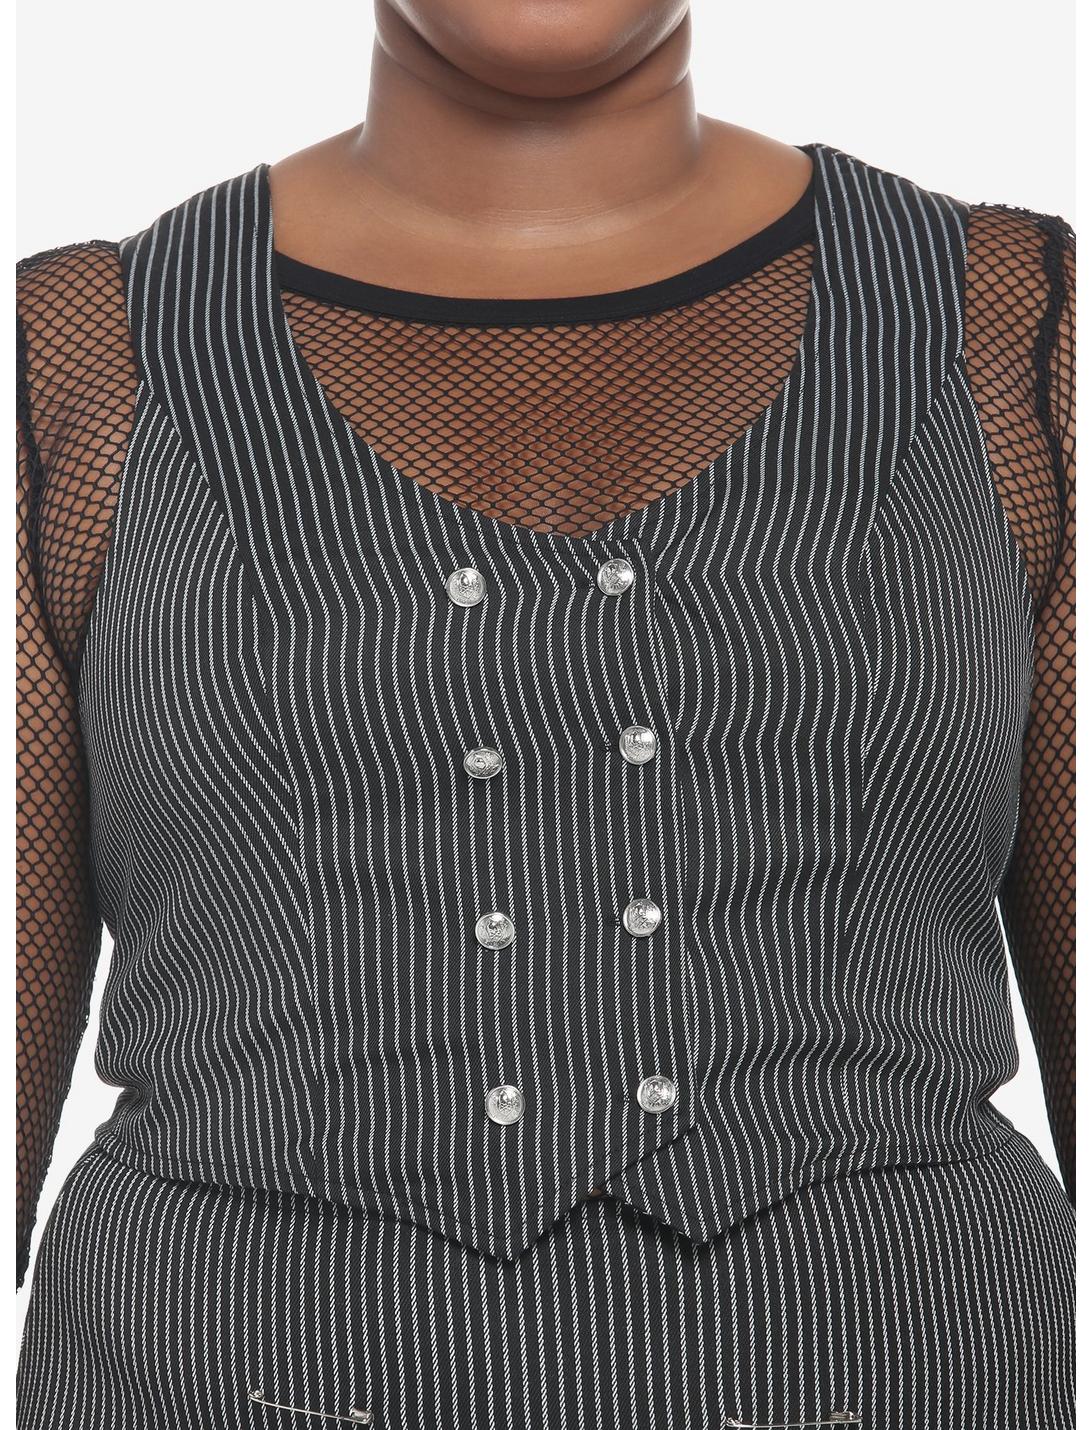 Pinstripe Double-Breasted Girls Vest Plus Size, BLACK, hi-res